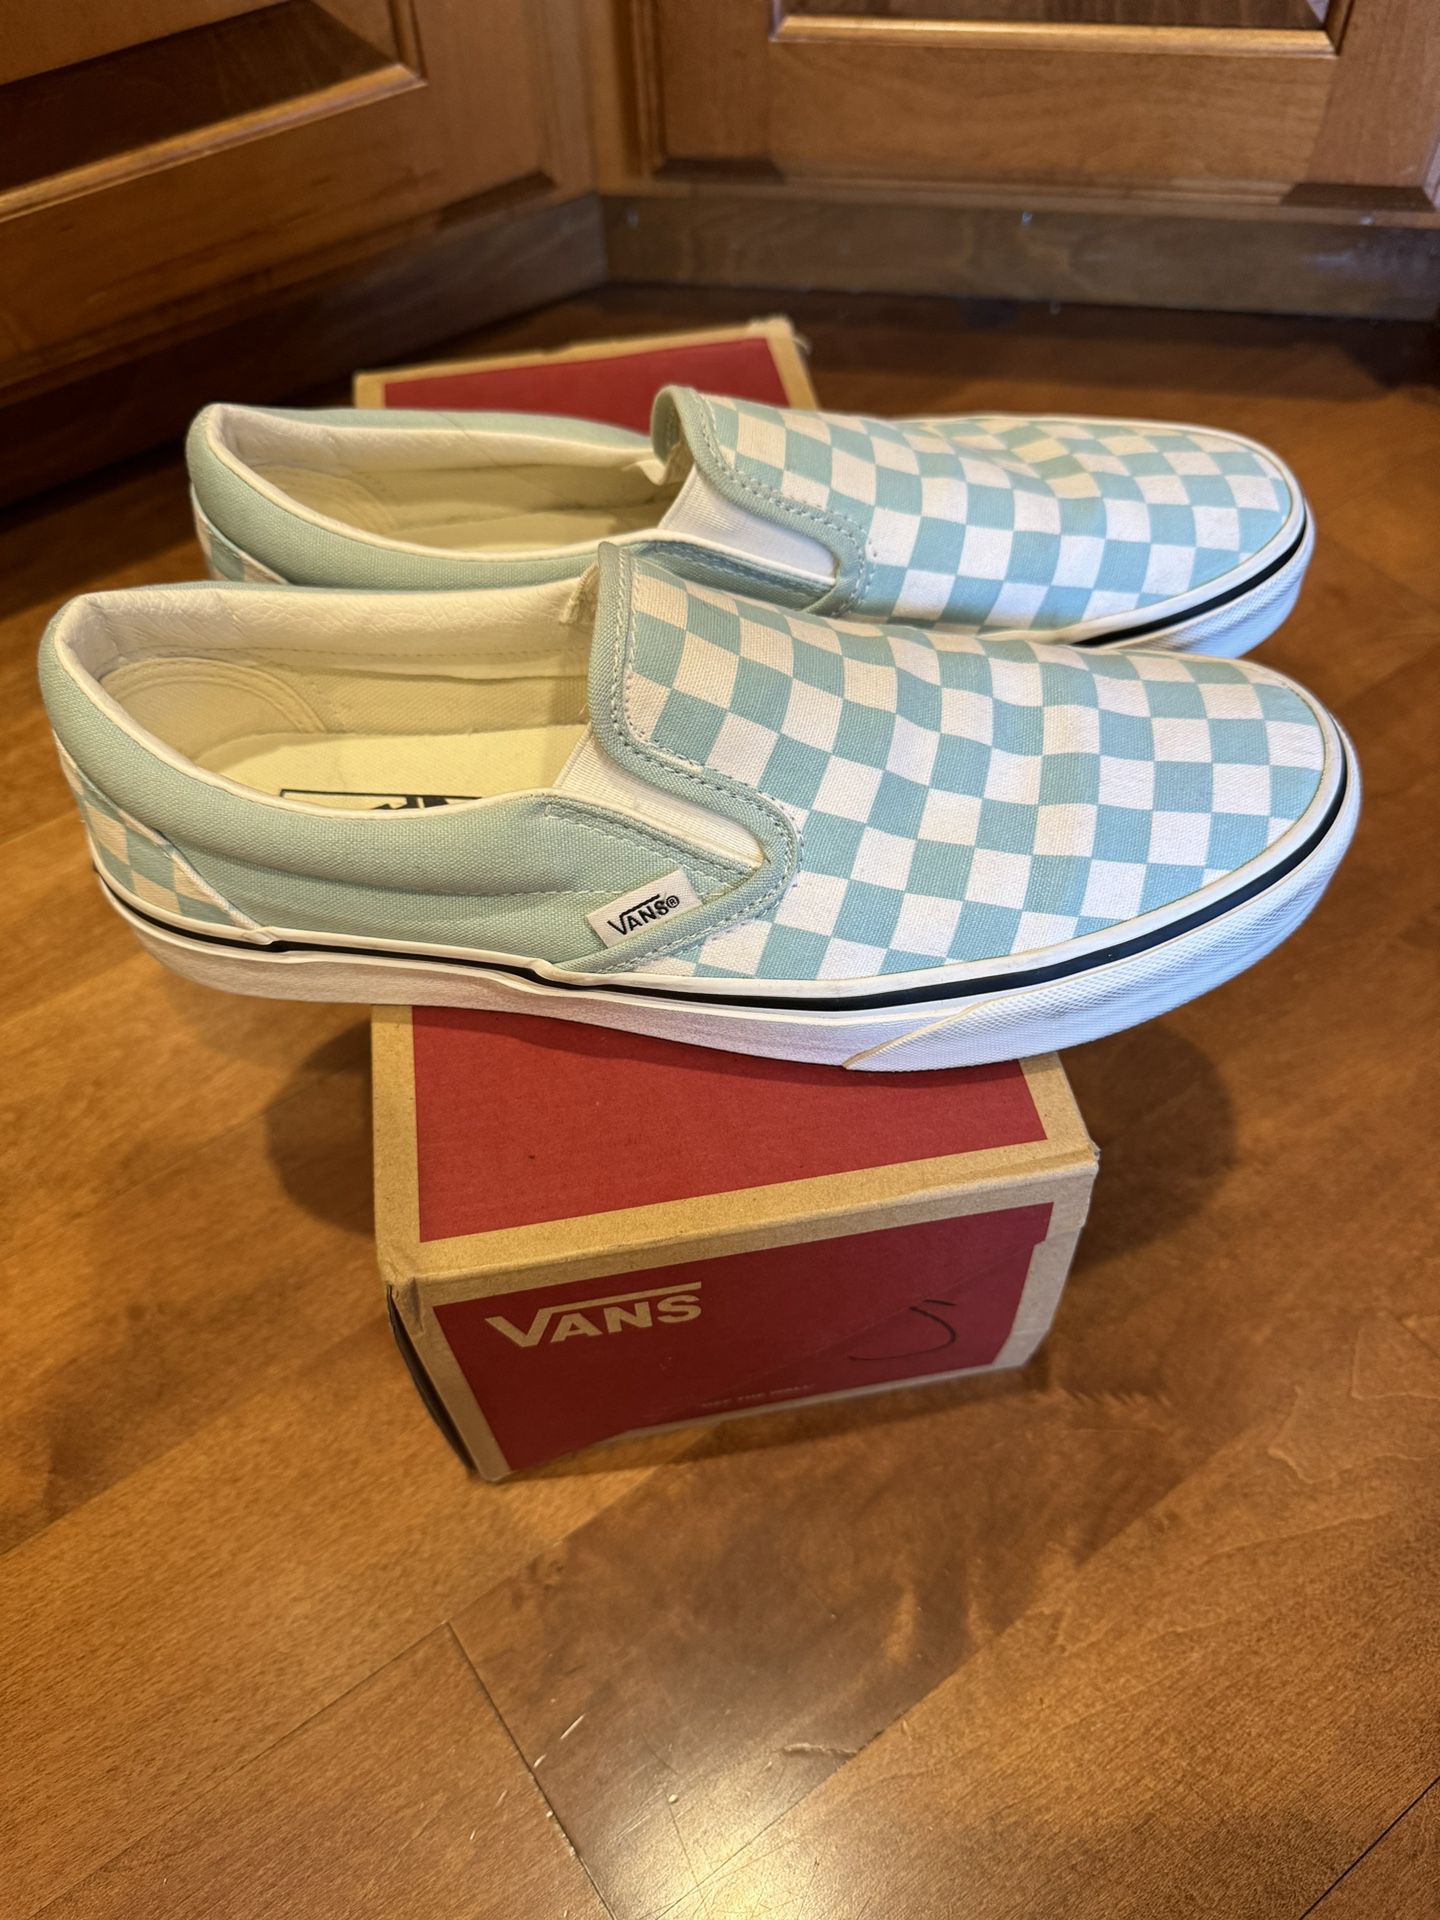 Vans Unisex Slip On Shoes Shipping Avaialbe 